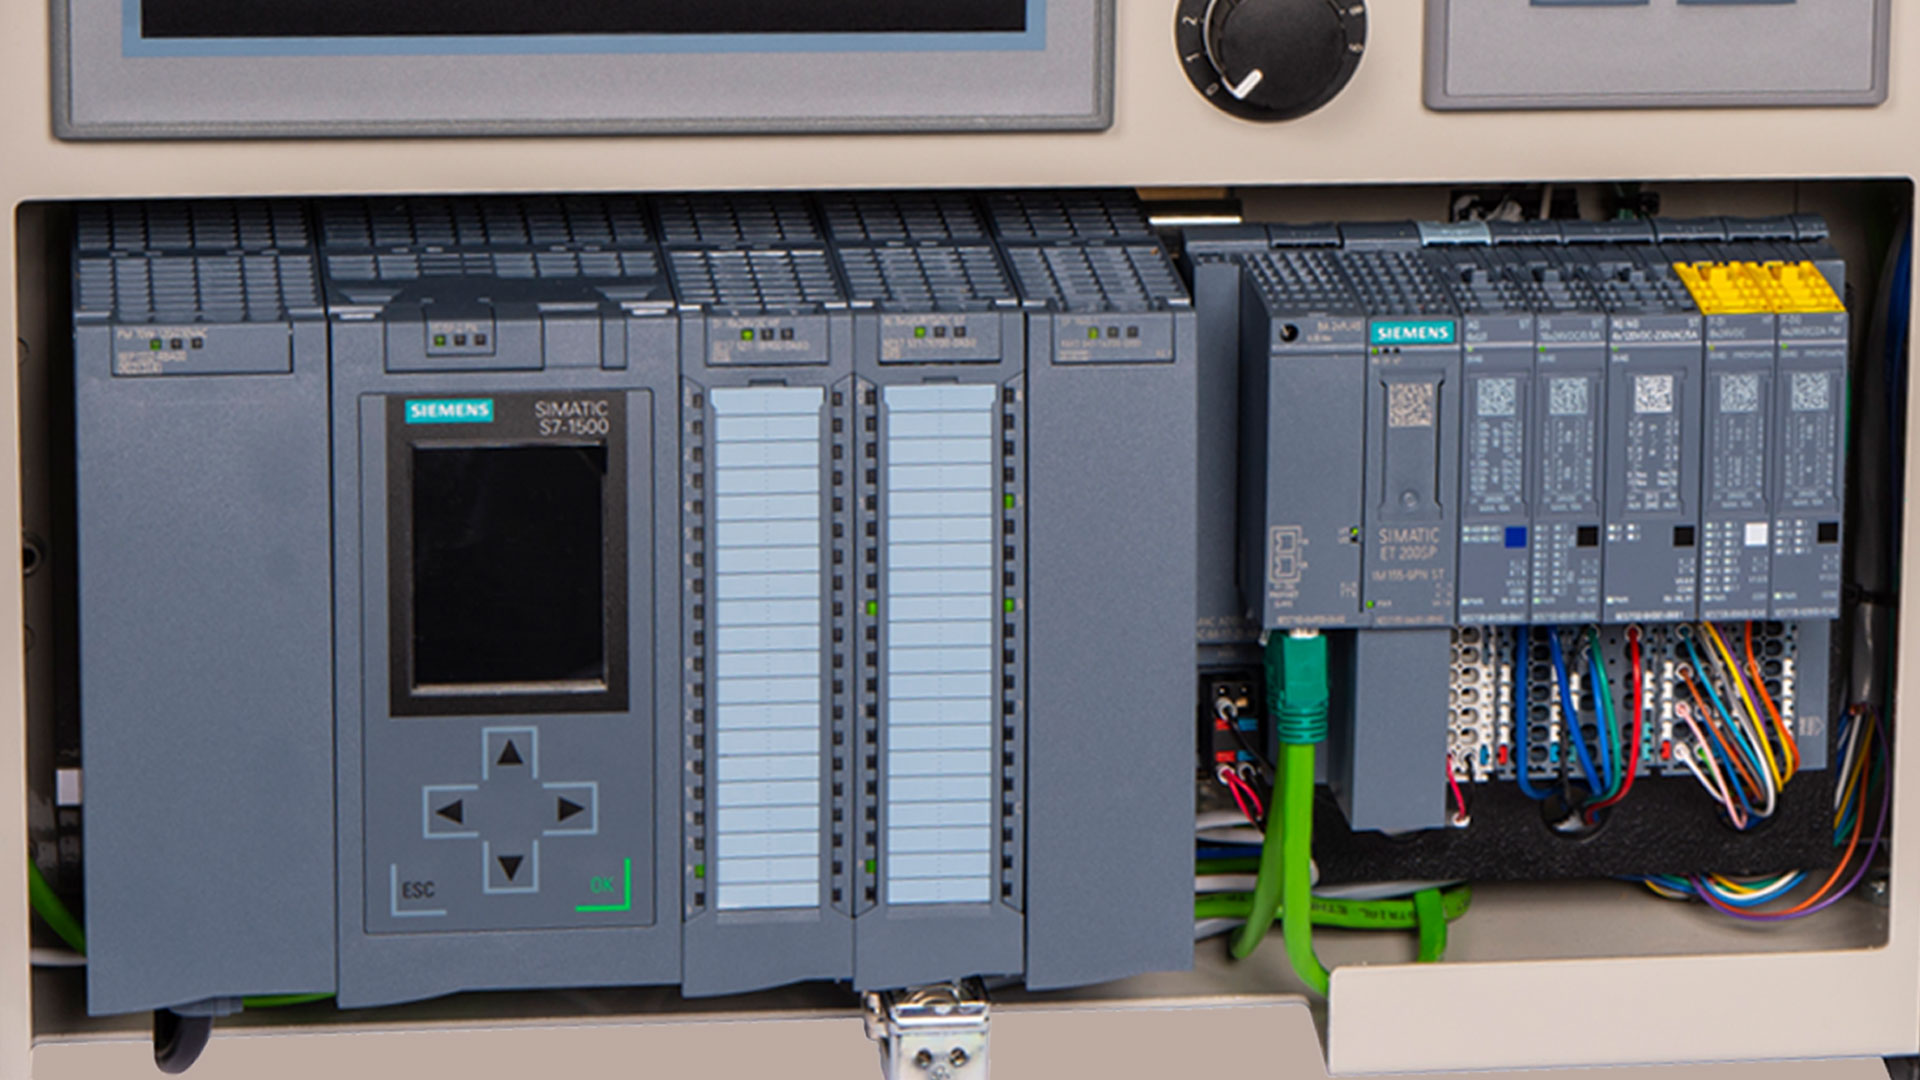 TIA Portal, S7-1500 - Create, Download, and Test your first PLC Program (S20)